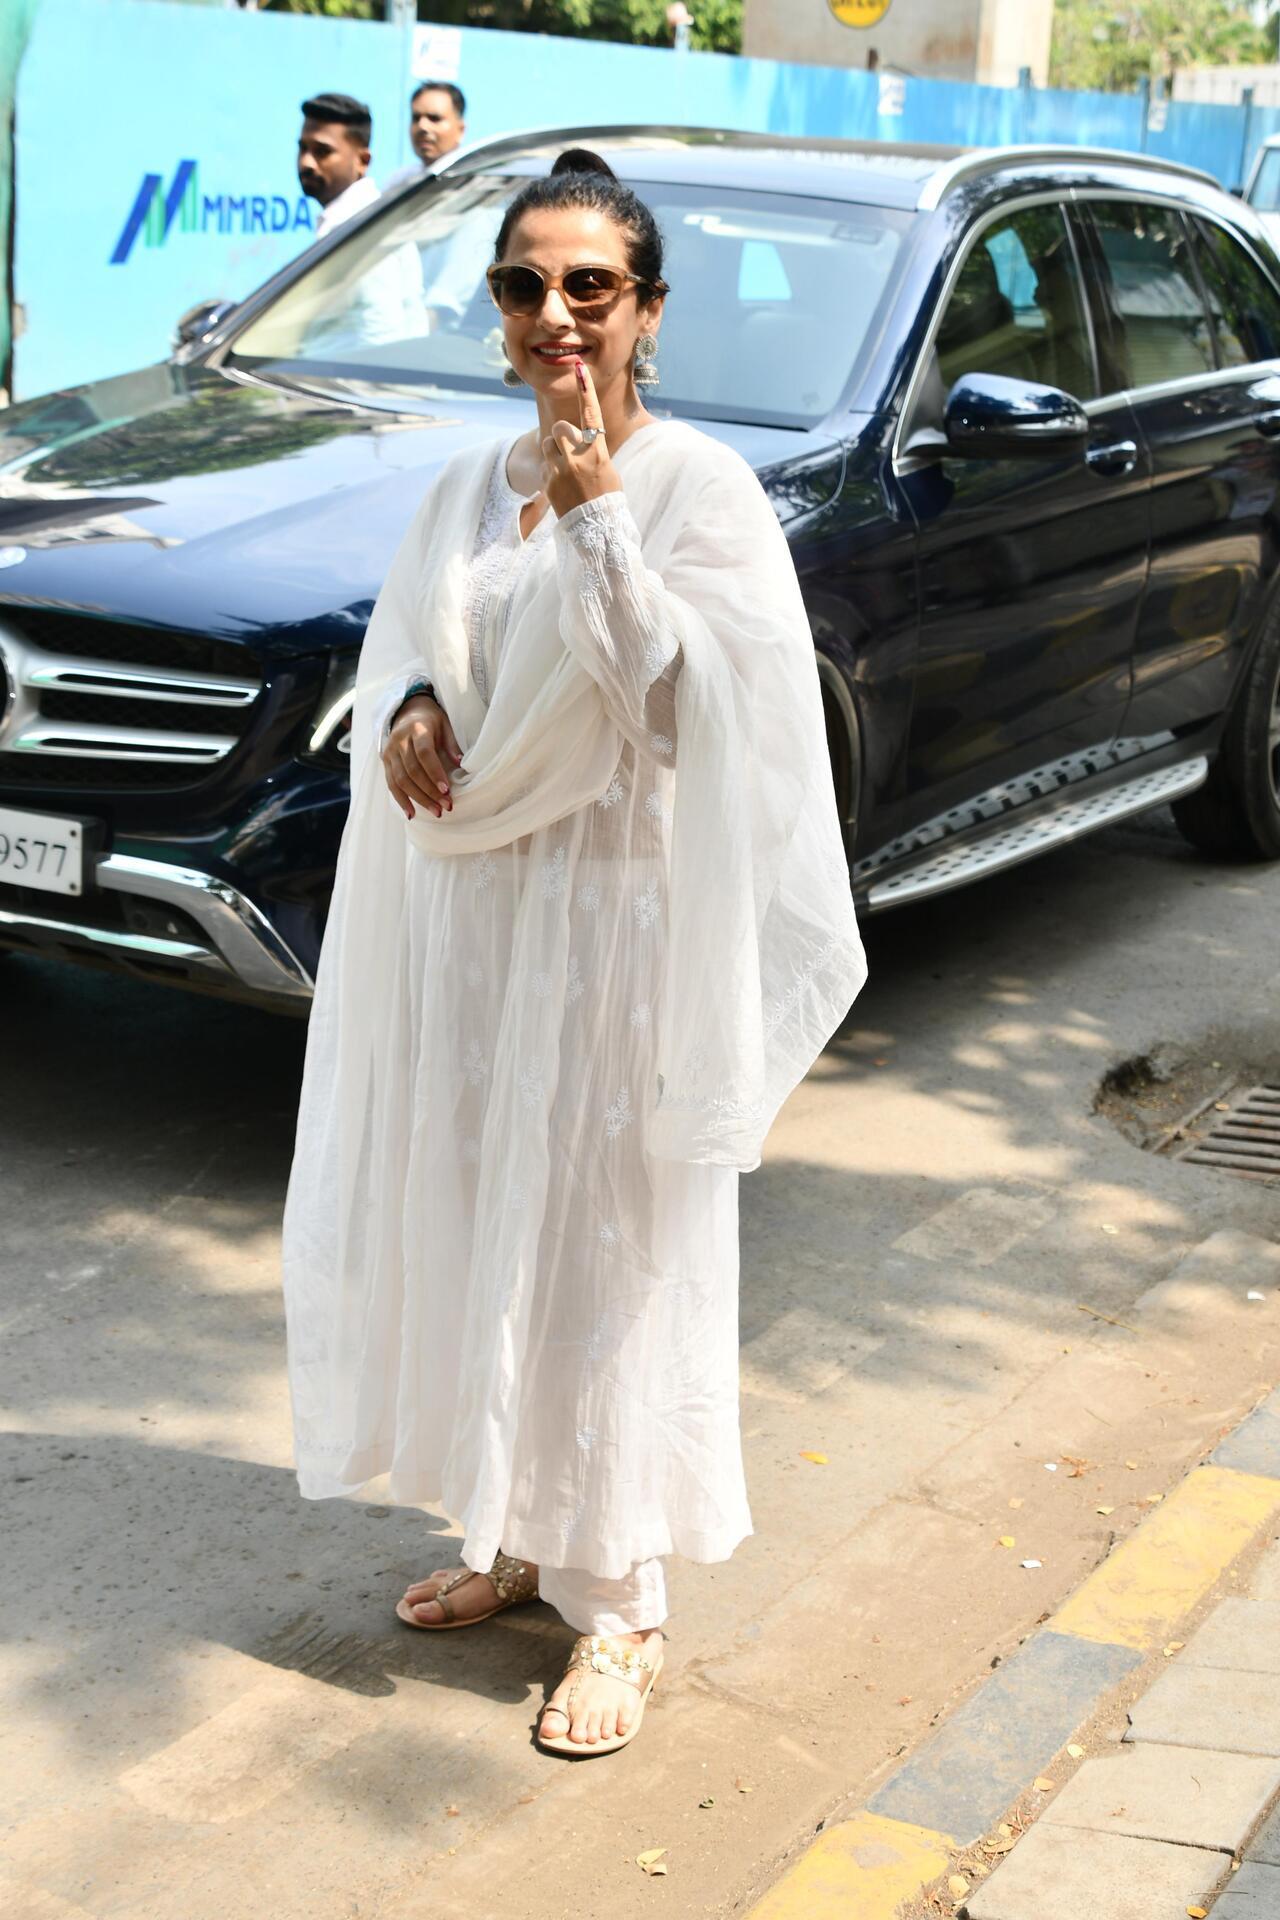 Actress Vidya Balan stuns in an all-white outfit for casting her vote